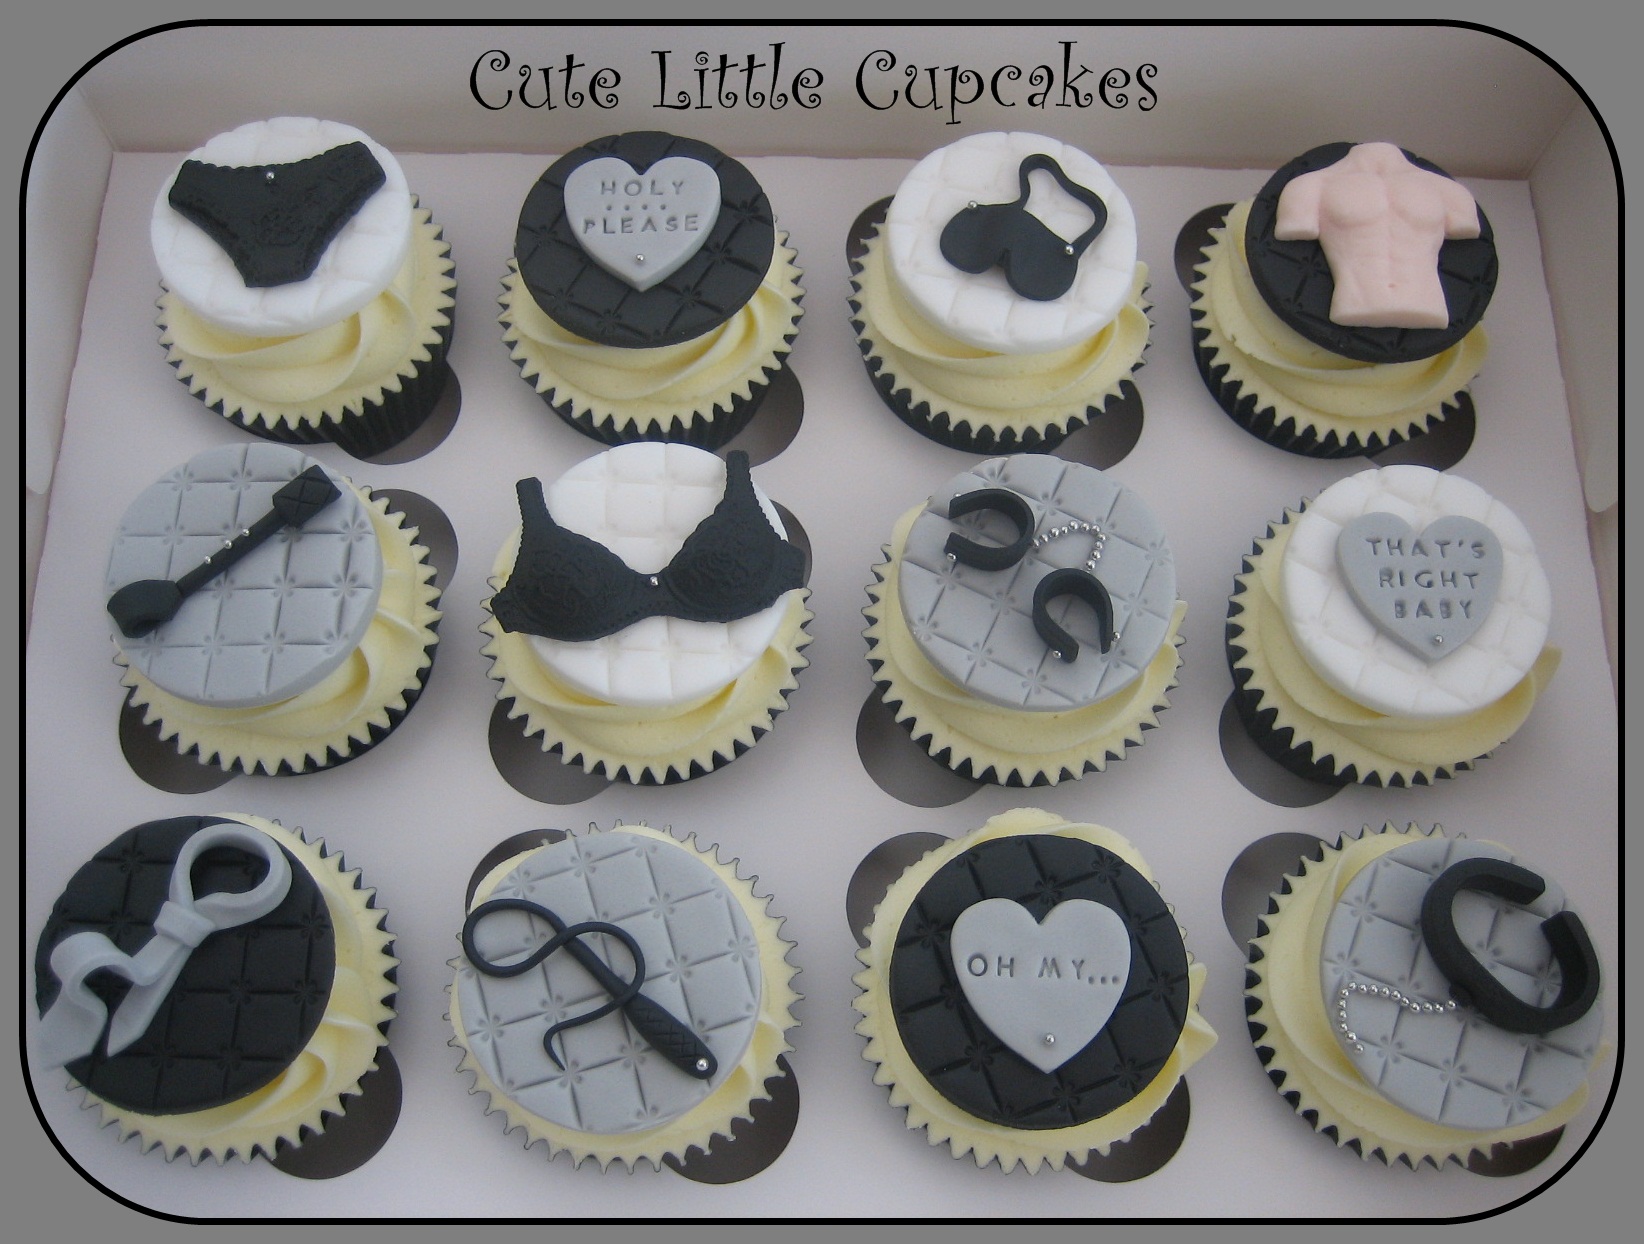 Fifty Shades of Grey Cupcakes